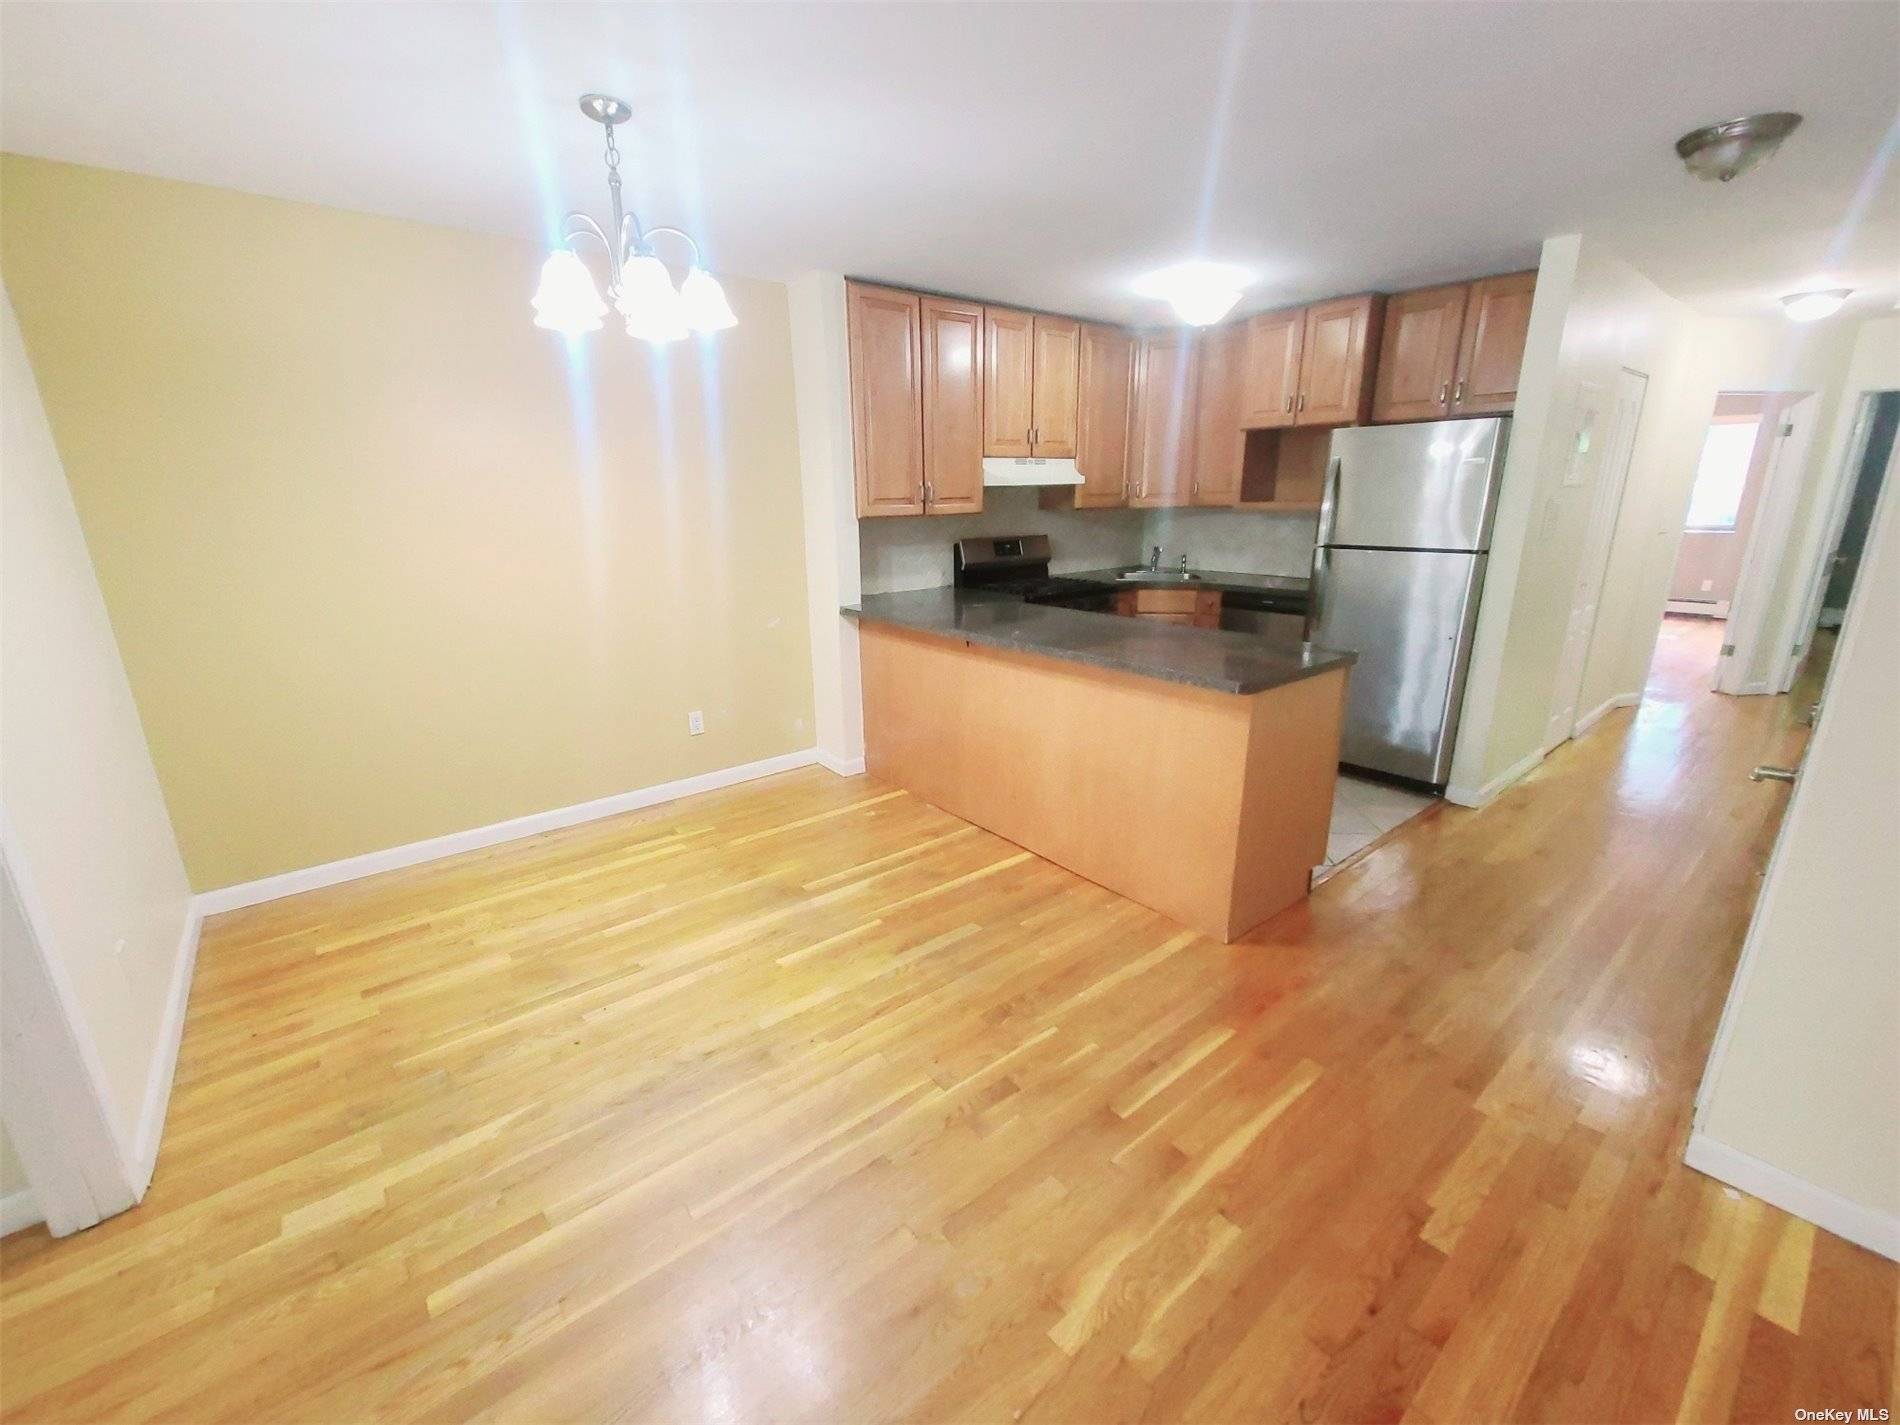 AMAZING OPPORTUNITY IN FOREST HILLS, XLG 3BR 2BATH with TERRACE amp ; PARKING IN PRIME LOCATION JUST 2 3 SHORT BLOCKS TO E F EXPRESS.